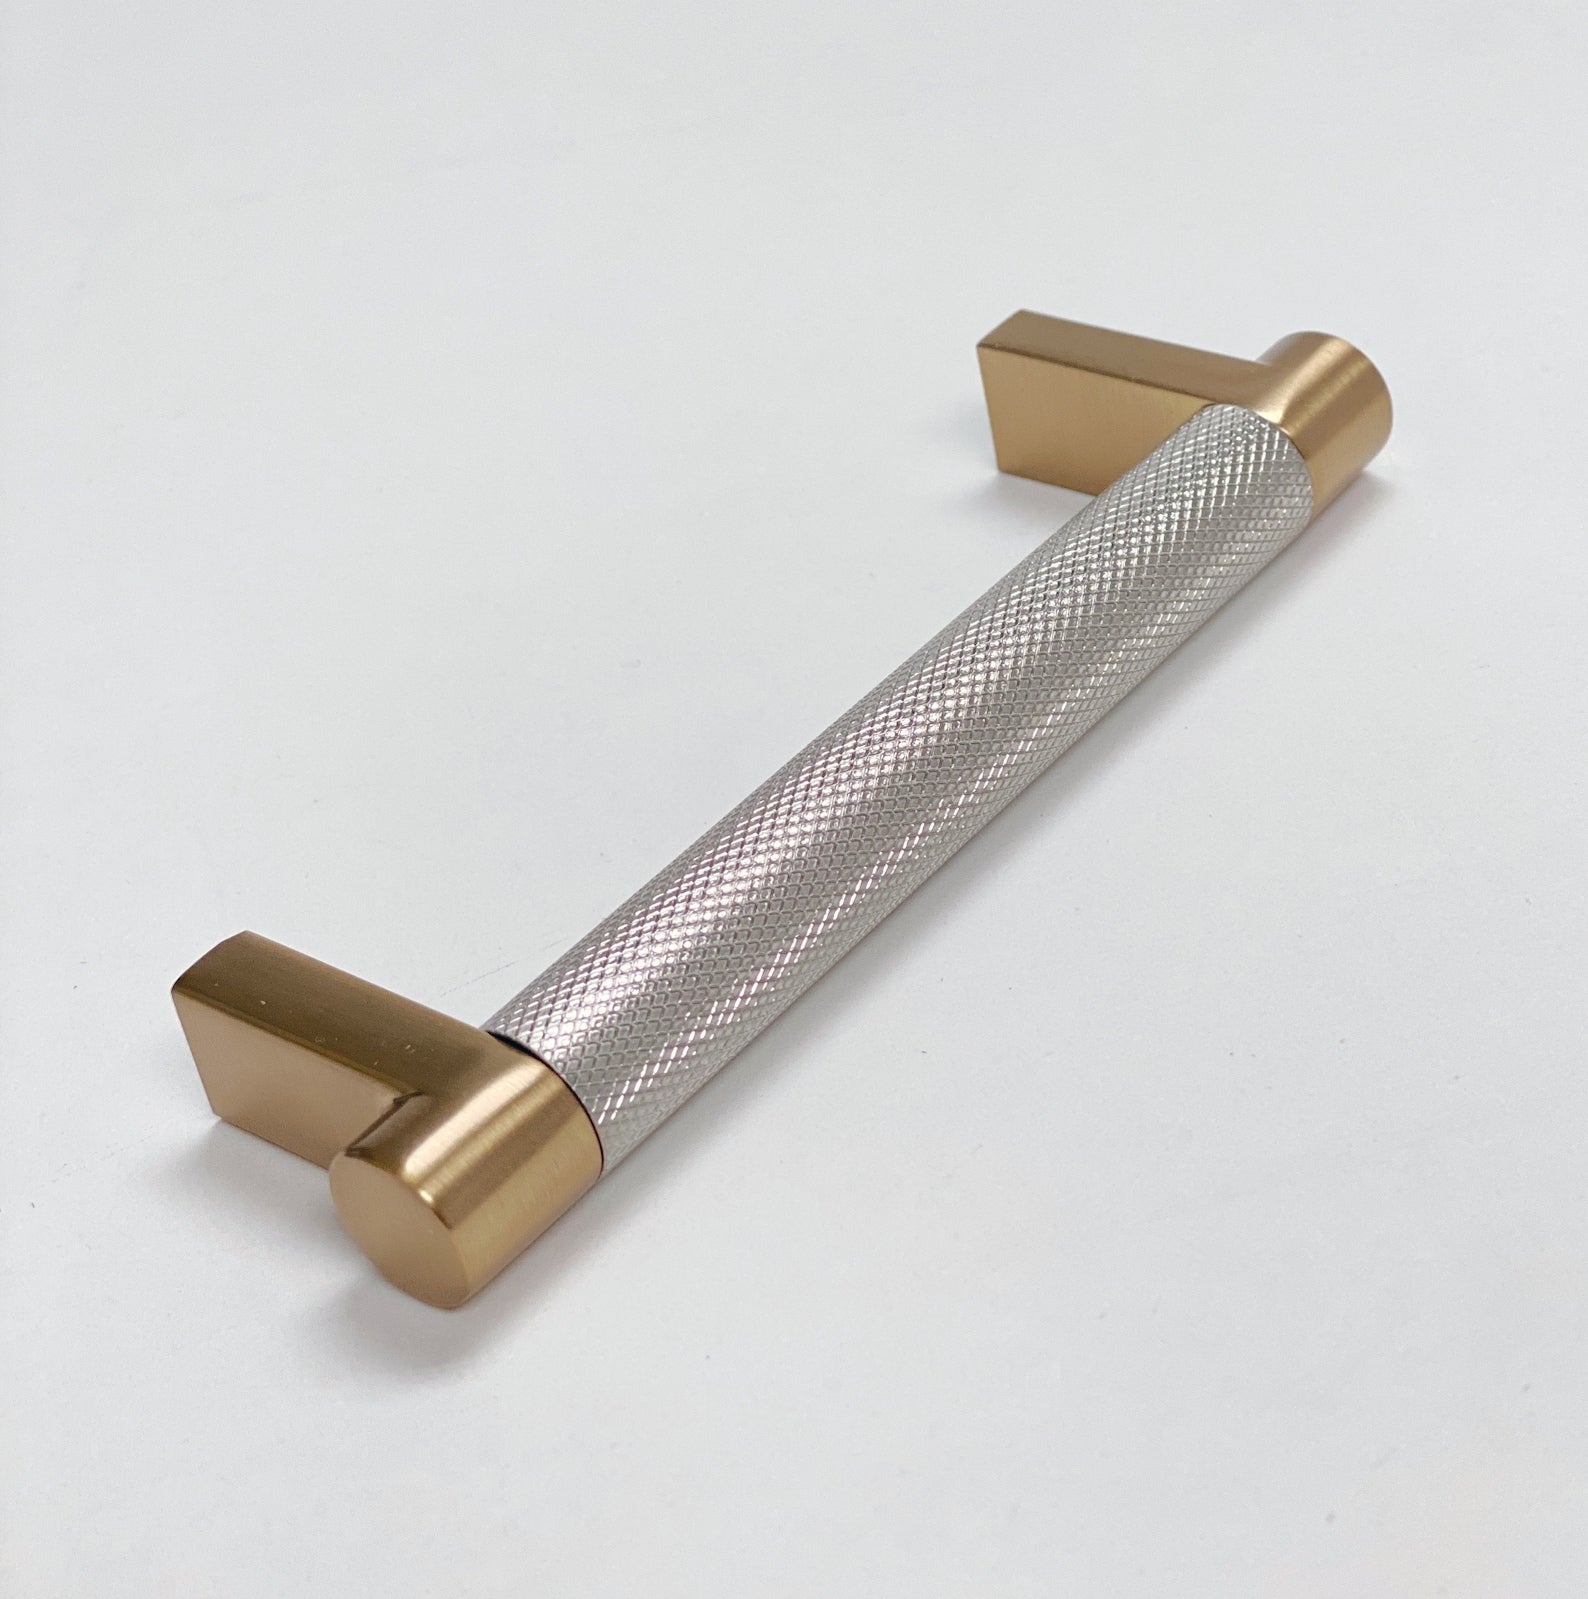 Knurled "Converse" Champagne Bronze and Brushed Nickel Dual-Finish Knobs and Pulls